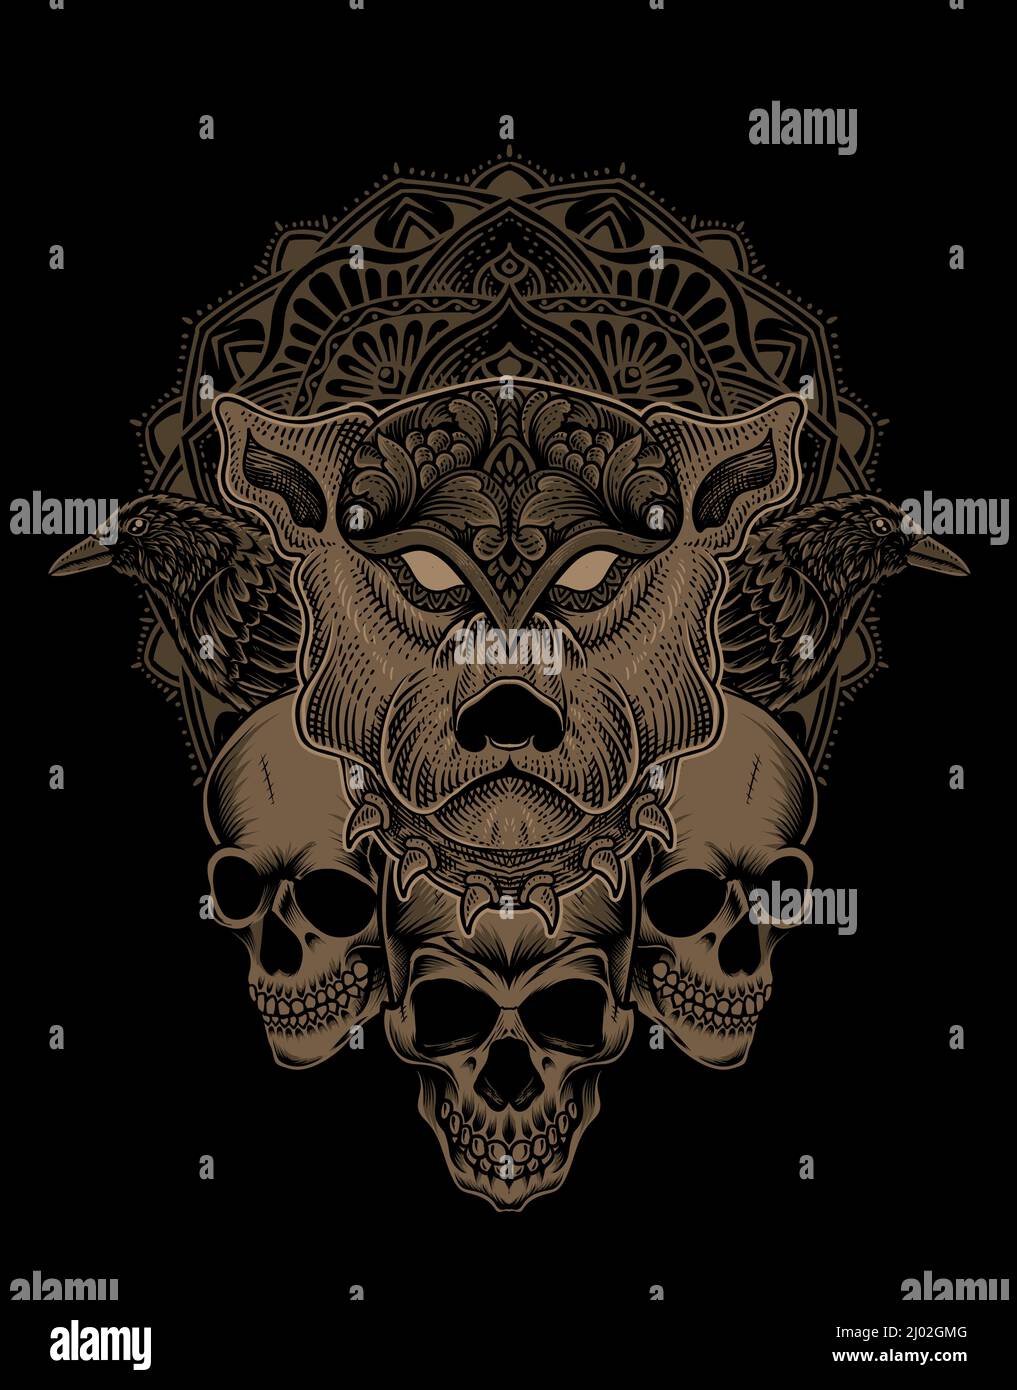 illustration dog head engraving mandala style with skull and crow bird Stock Vector